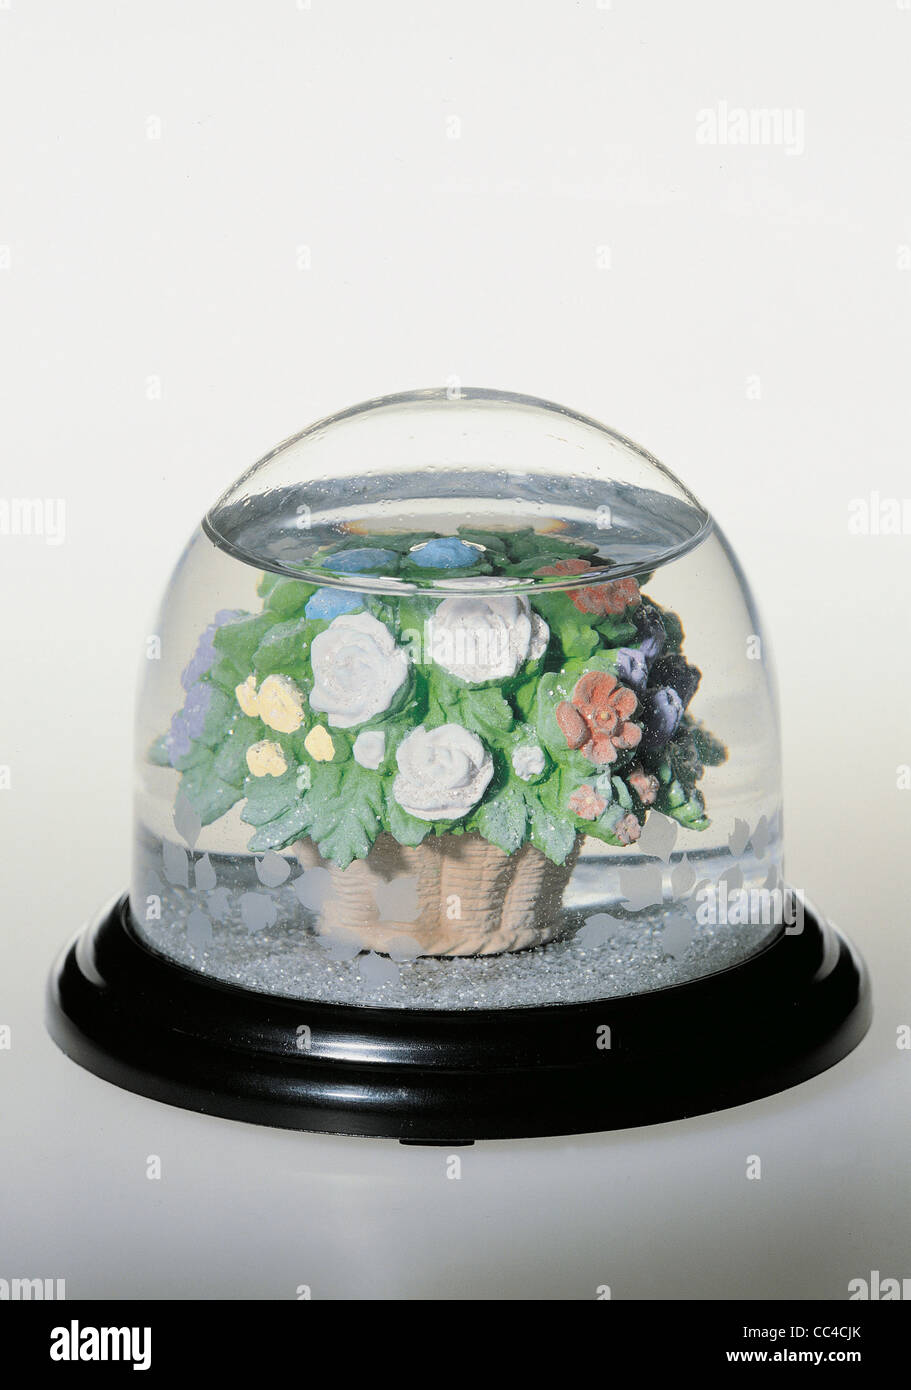 Collecting: Snowball Snowglobe Flowers Stock Photo